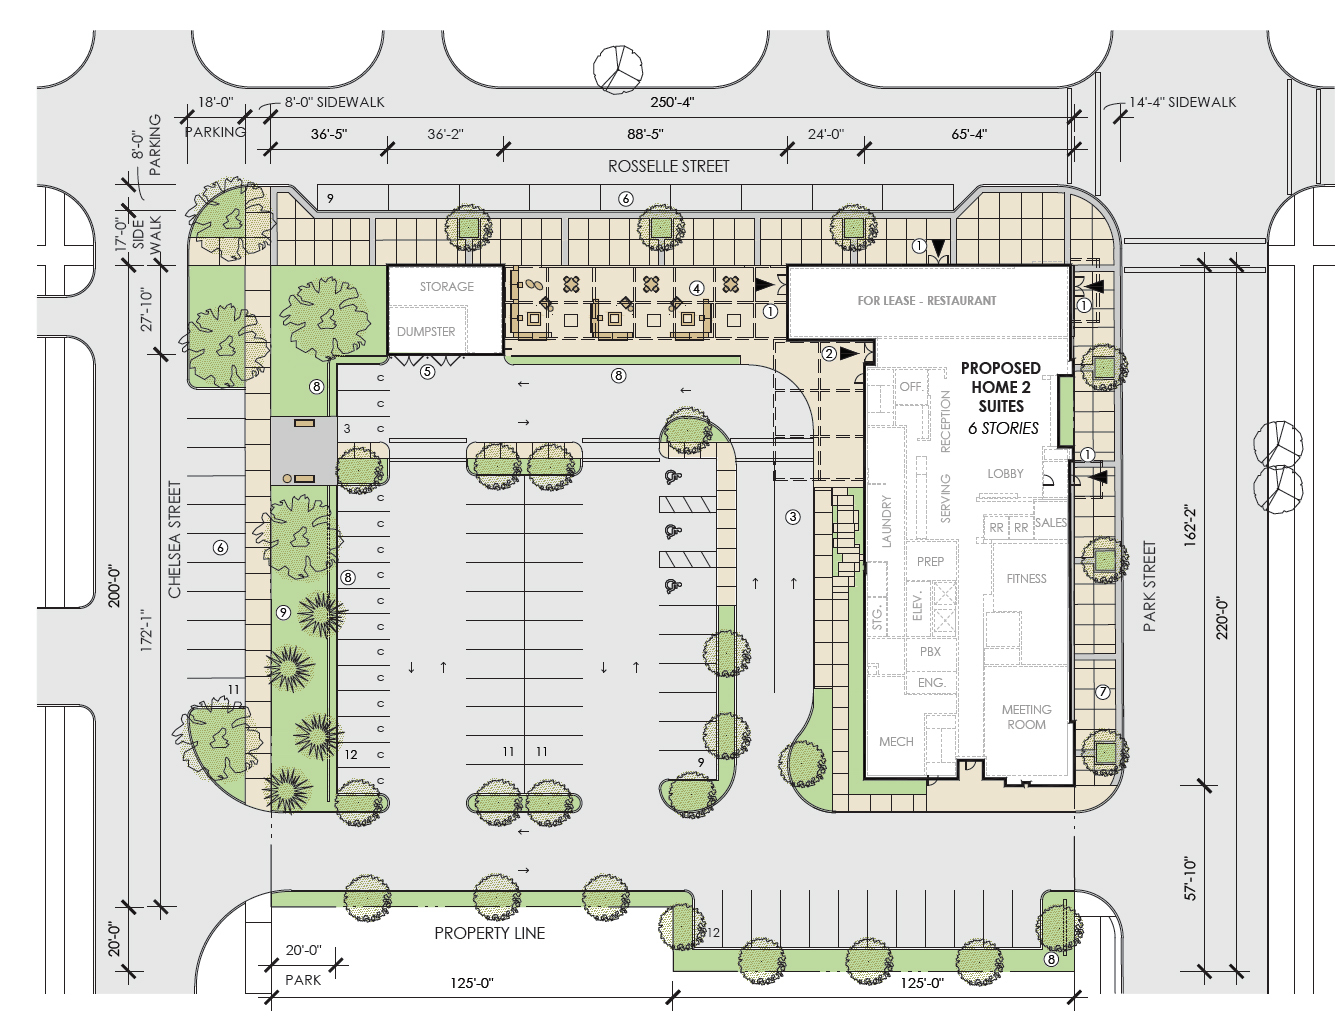 The site plan for the Home2 Suites.